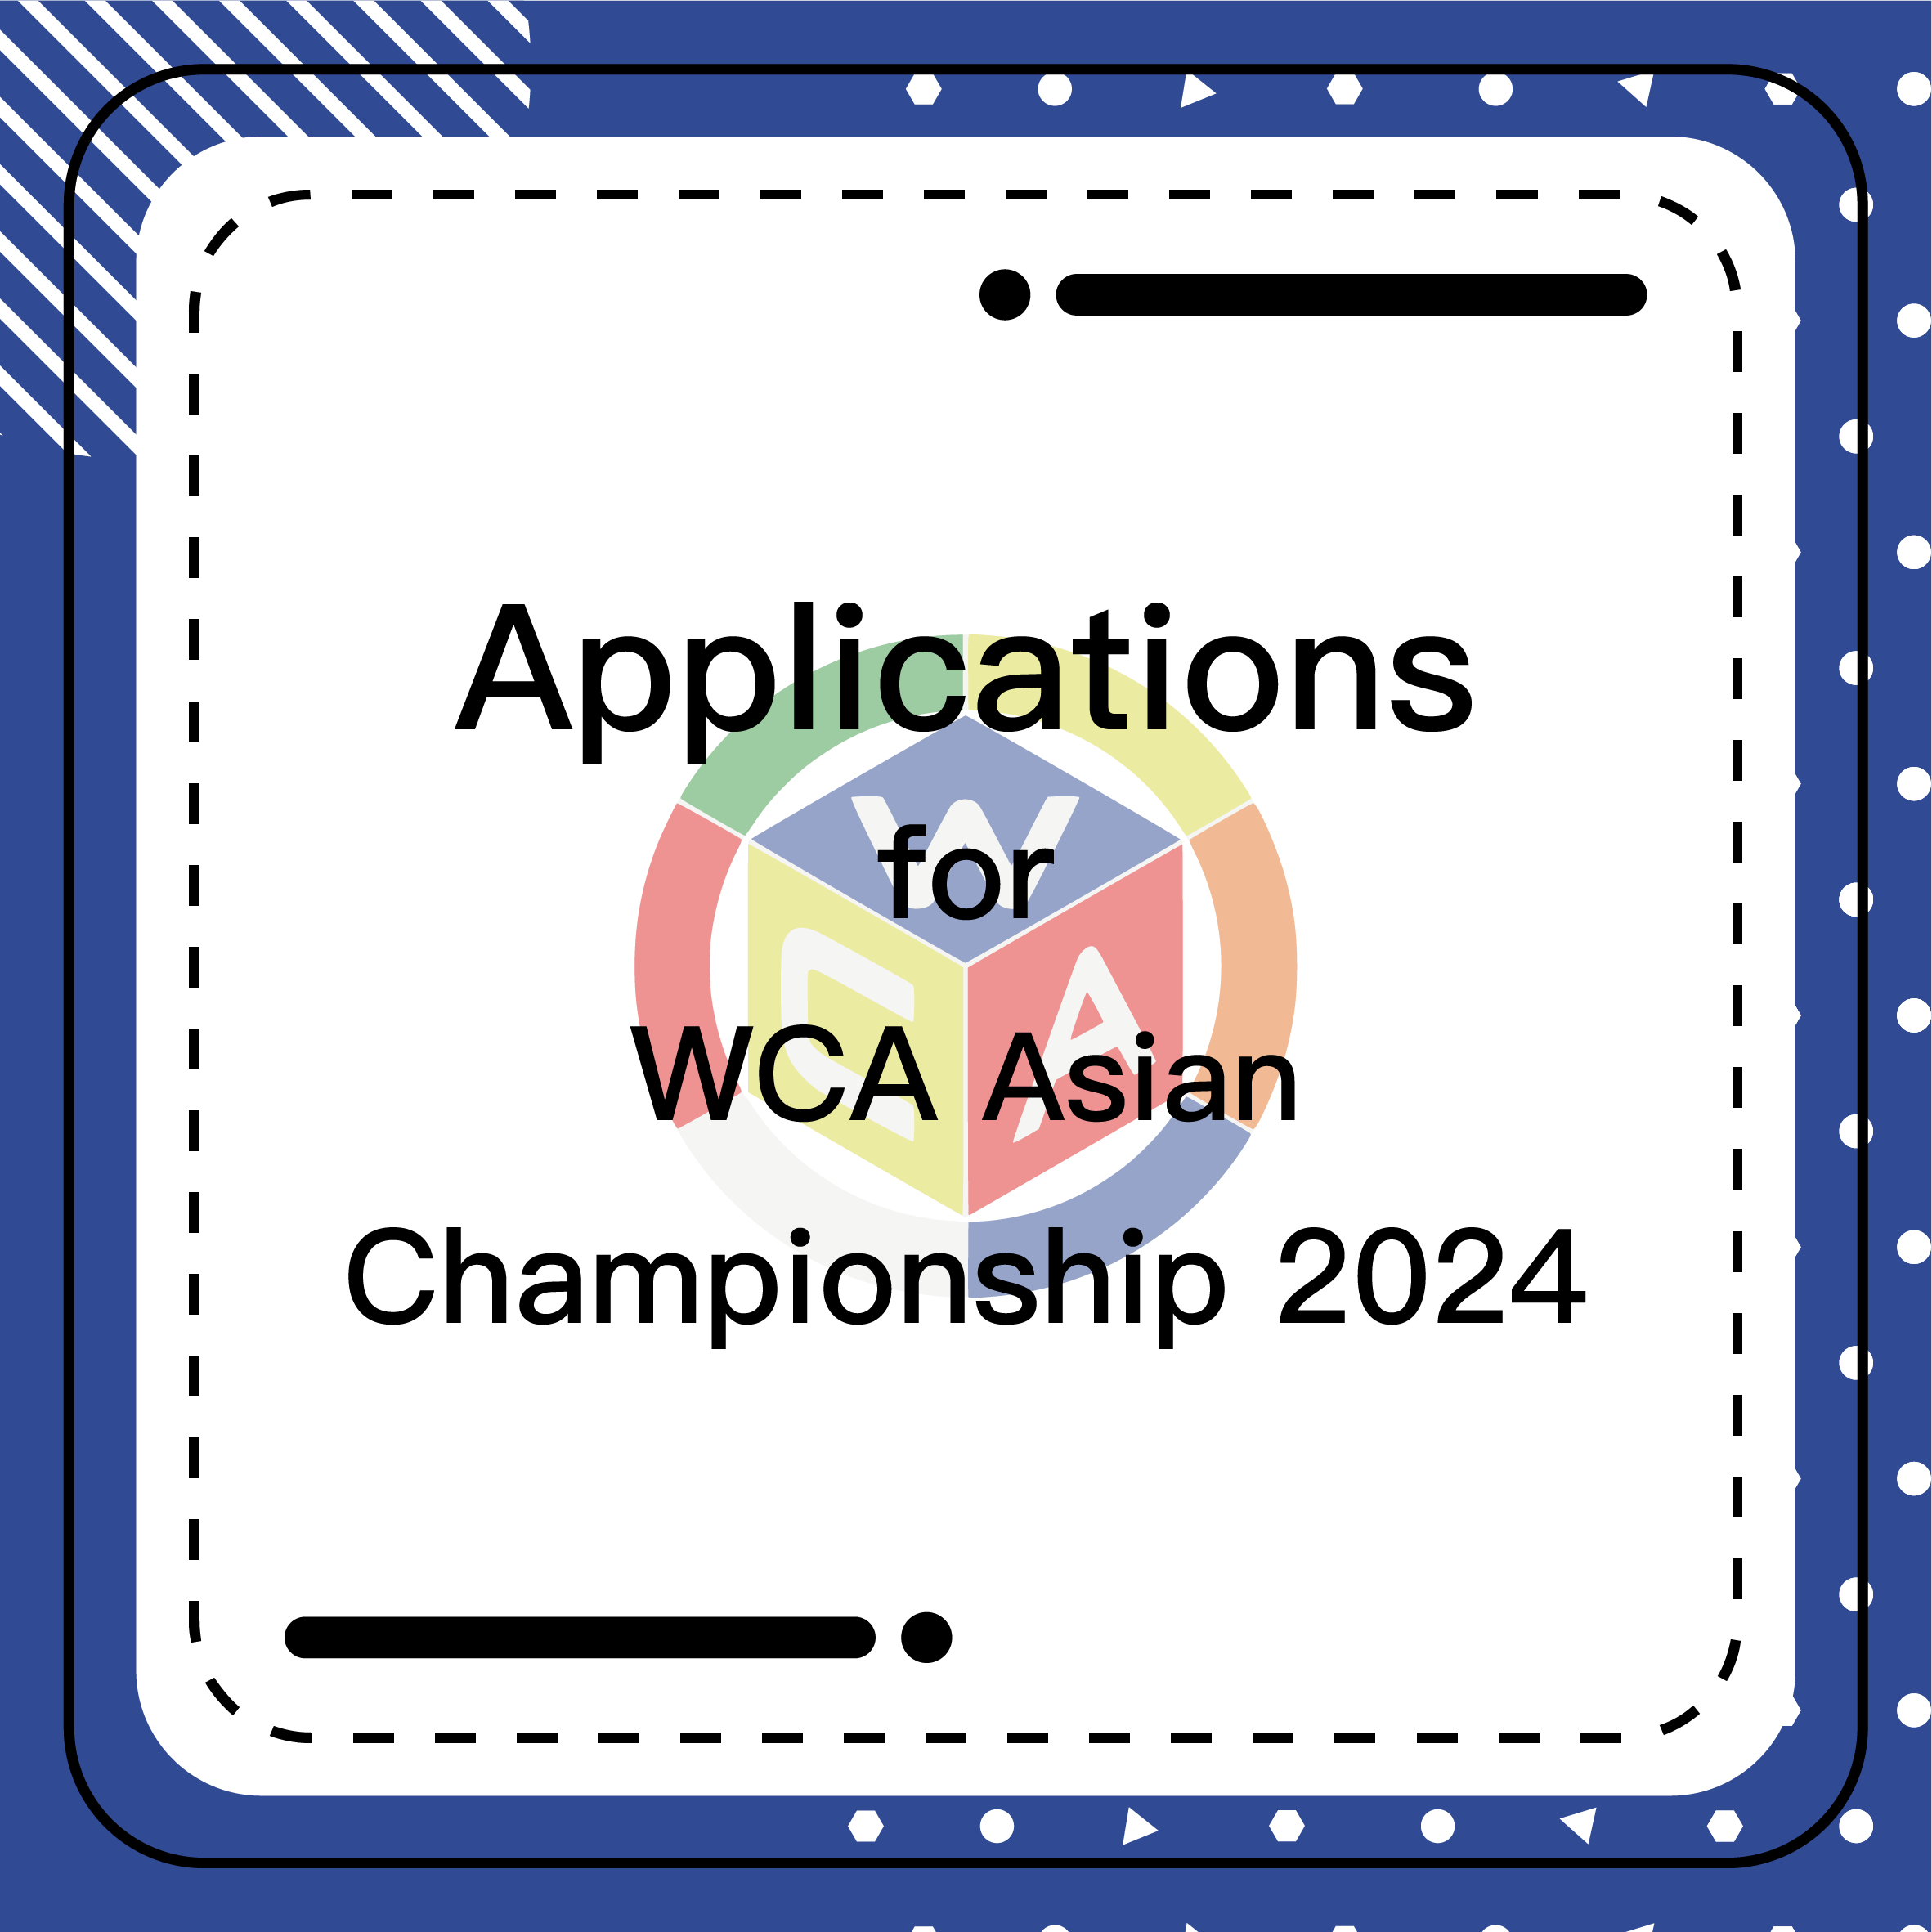 Petition · Support Taiwan's Participation in the World Cube Association (WCA)  ·